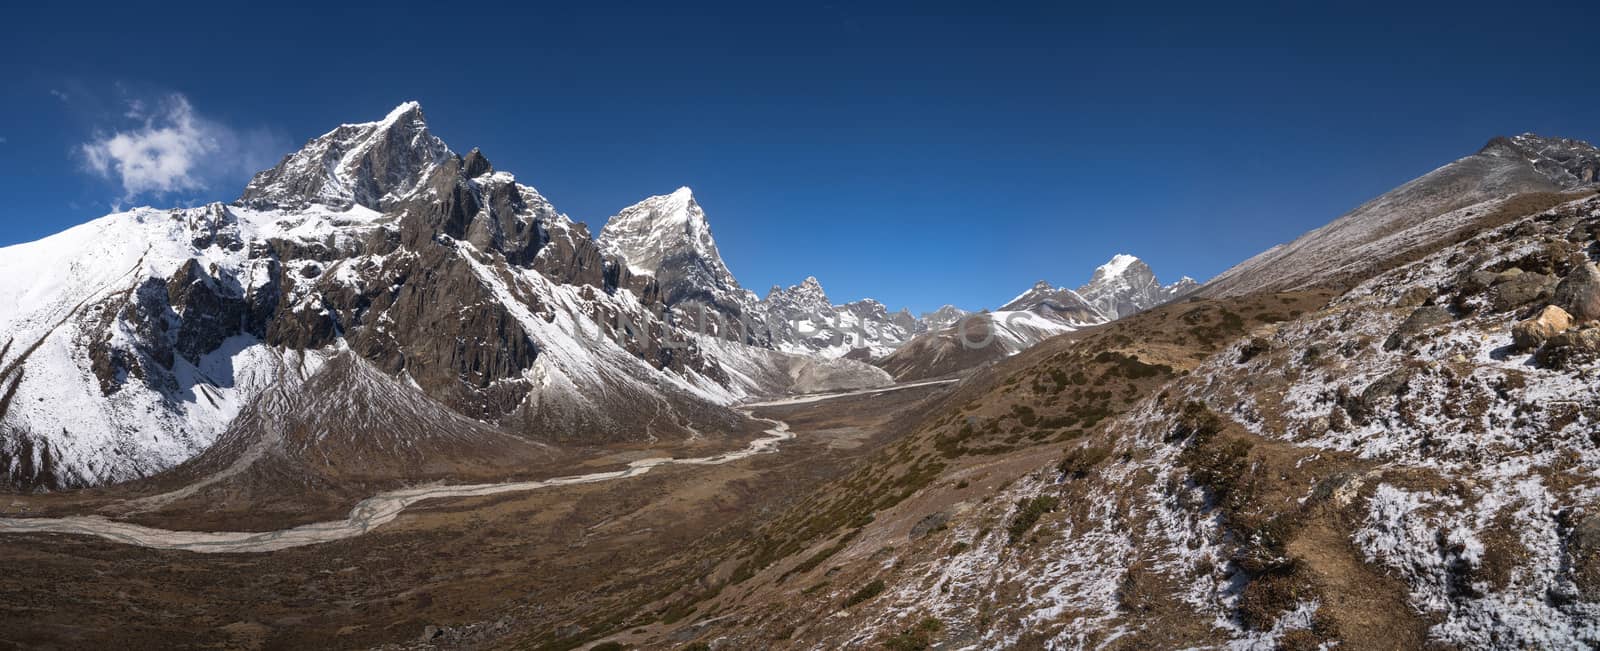 Pheriche Valley with Cholatse and Taboche peaks in Himalaya. Large resolution